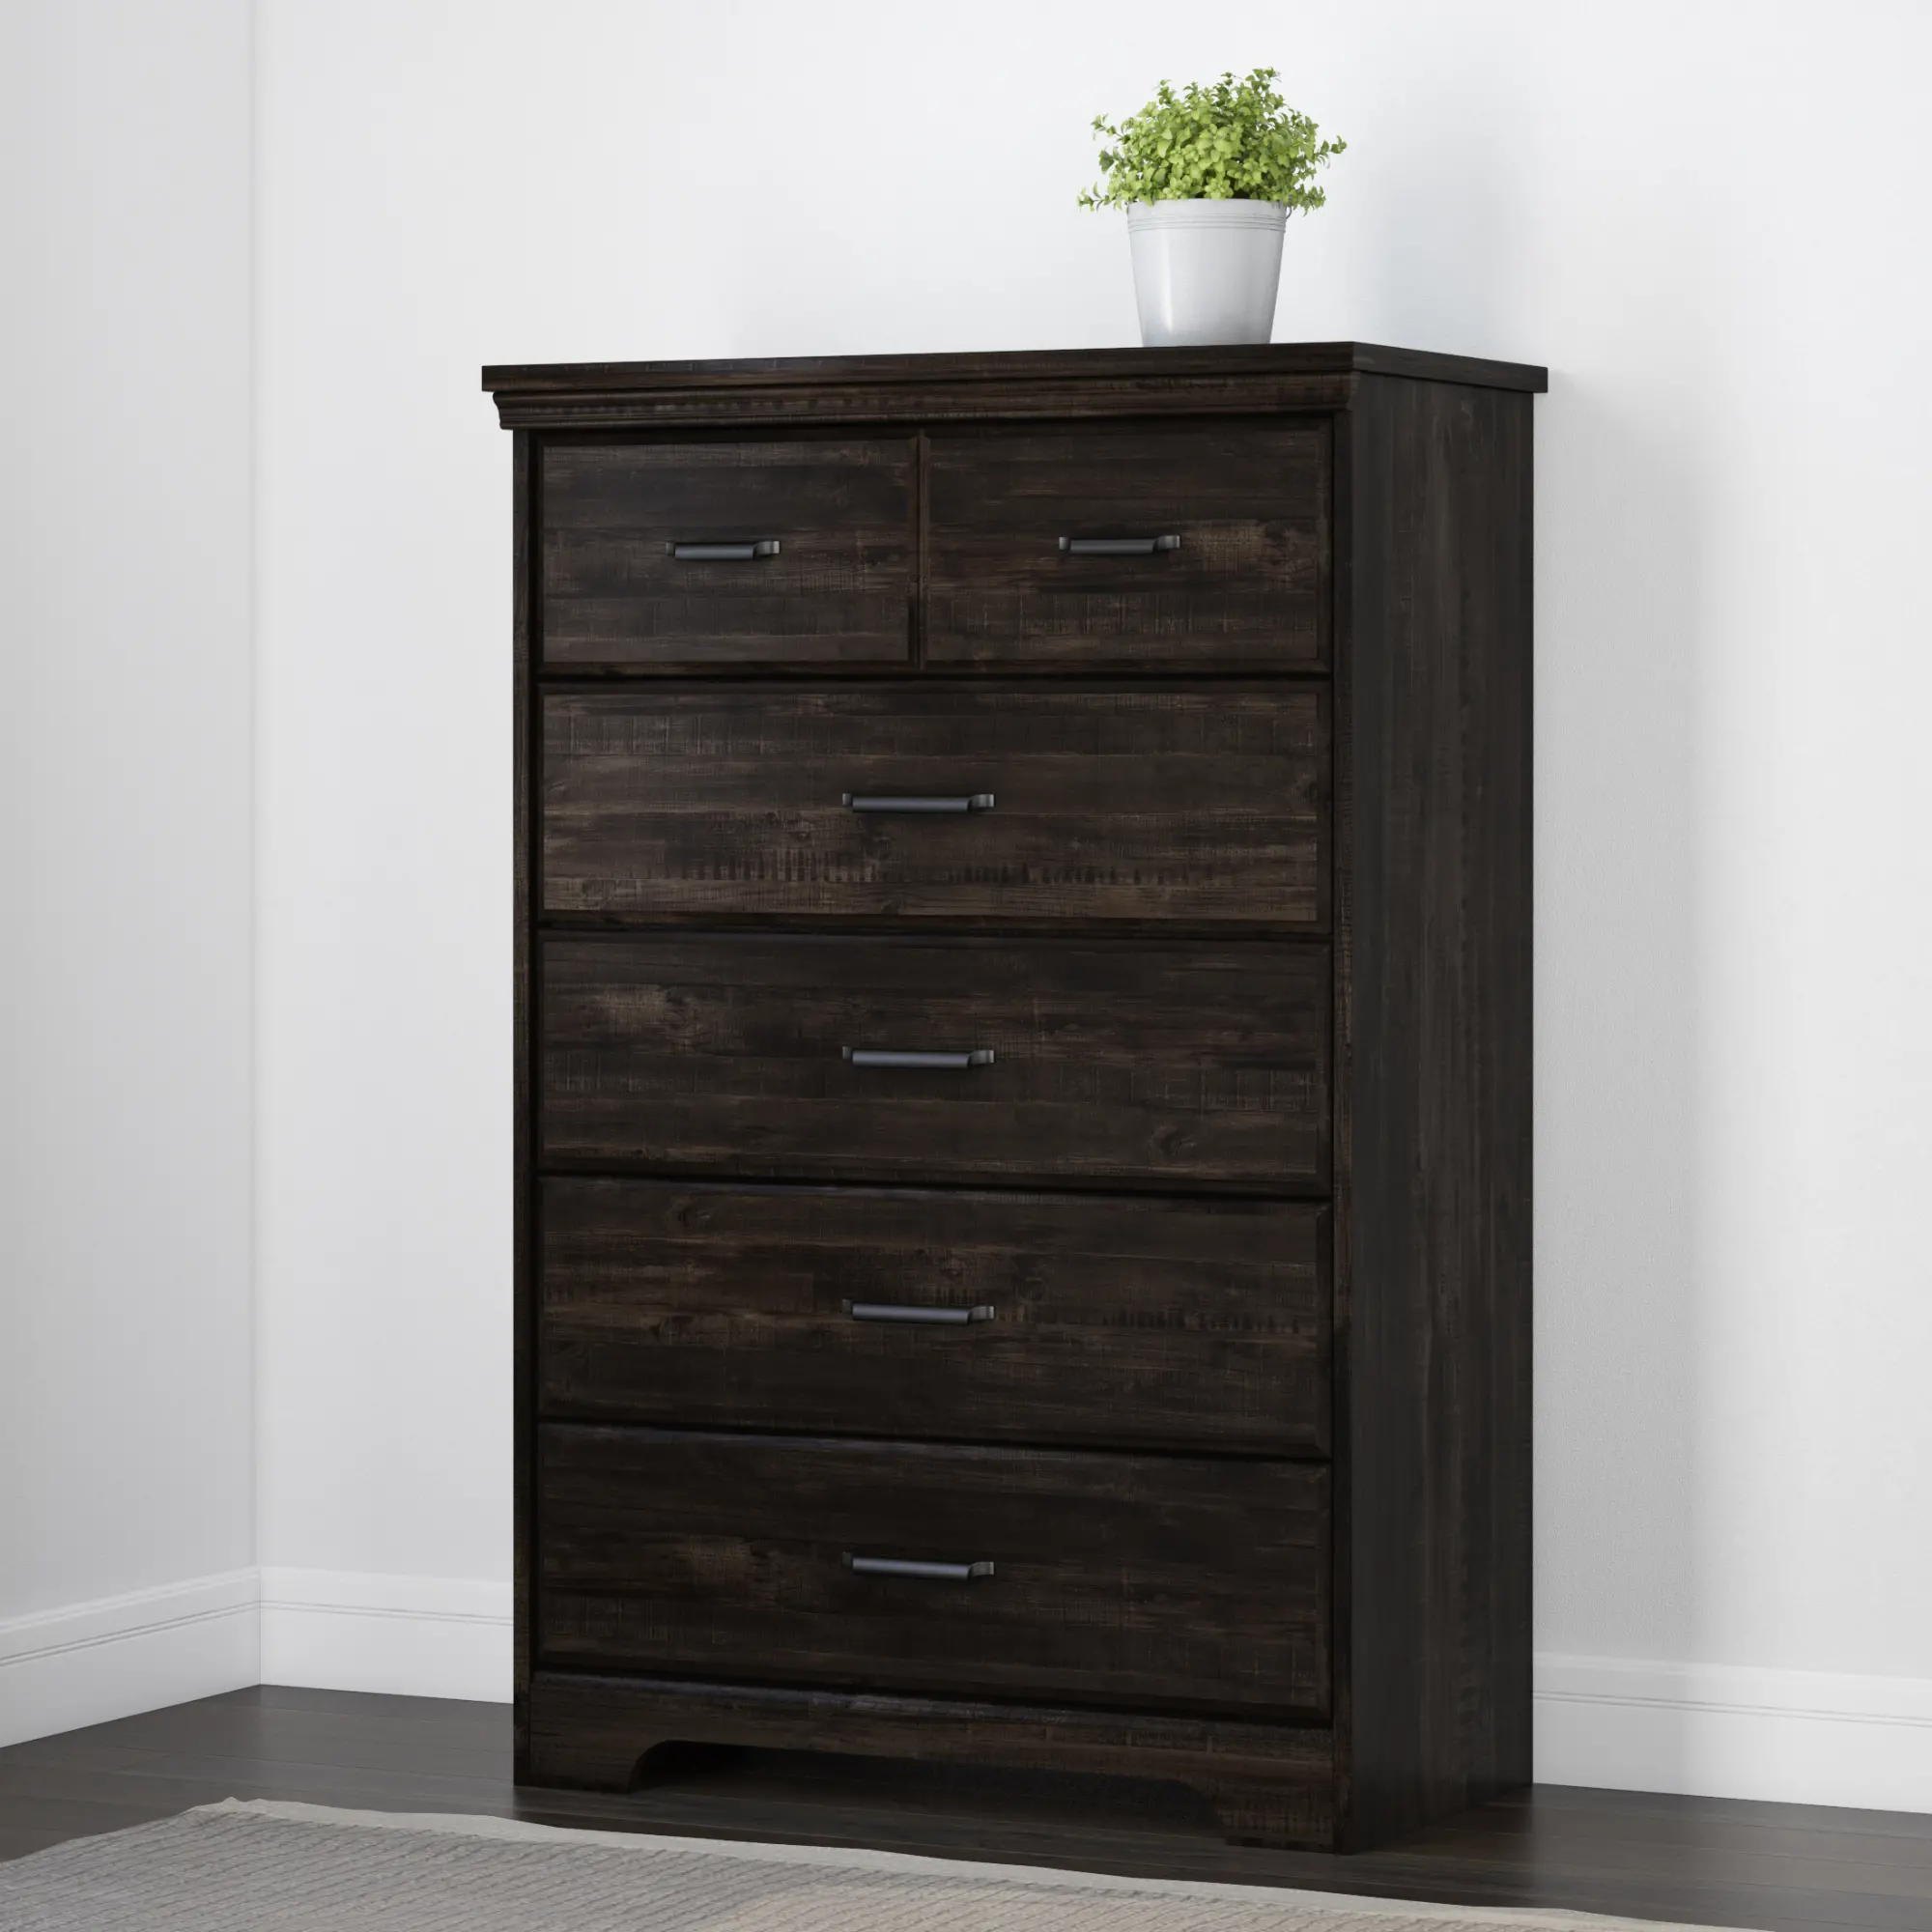 Versa Rubbed Black 5-Drawer Chest - South Shore